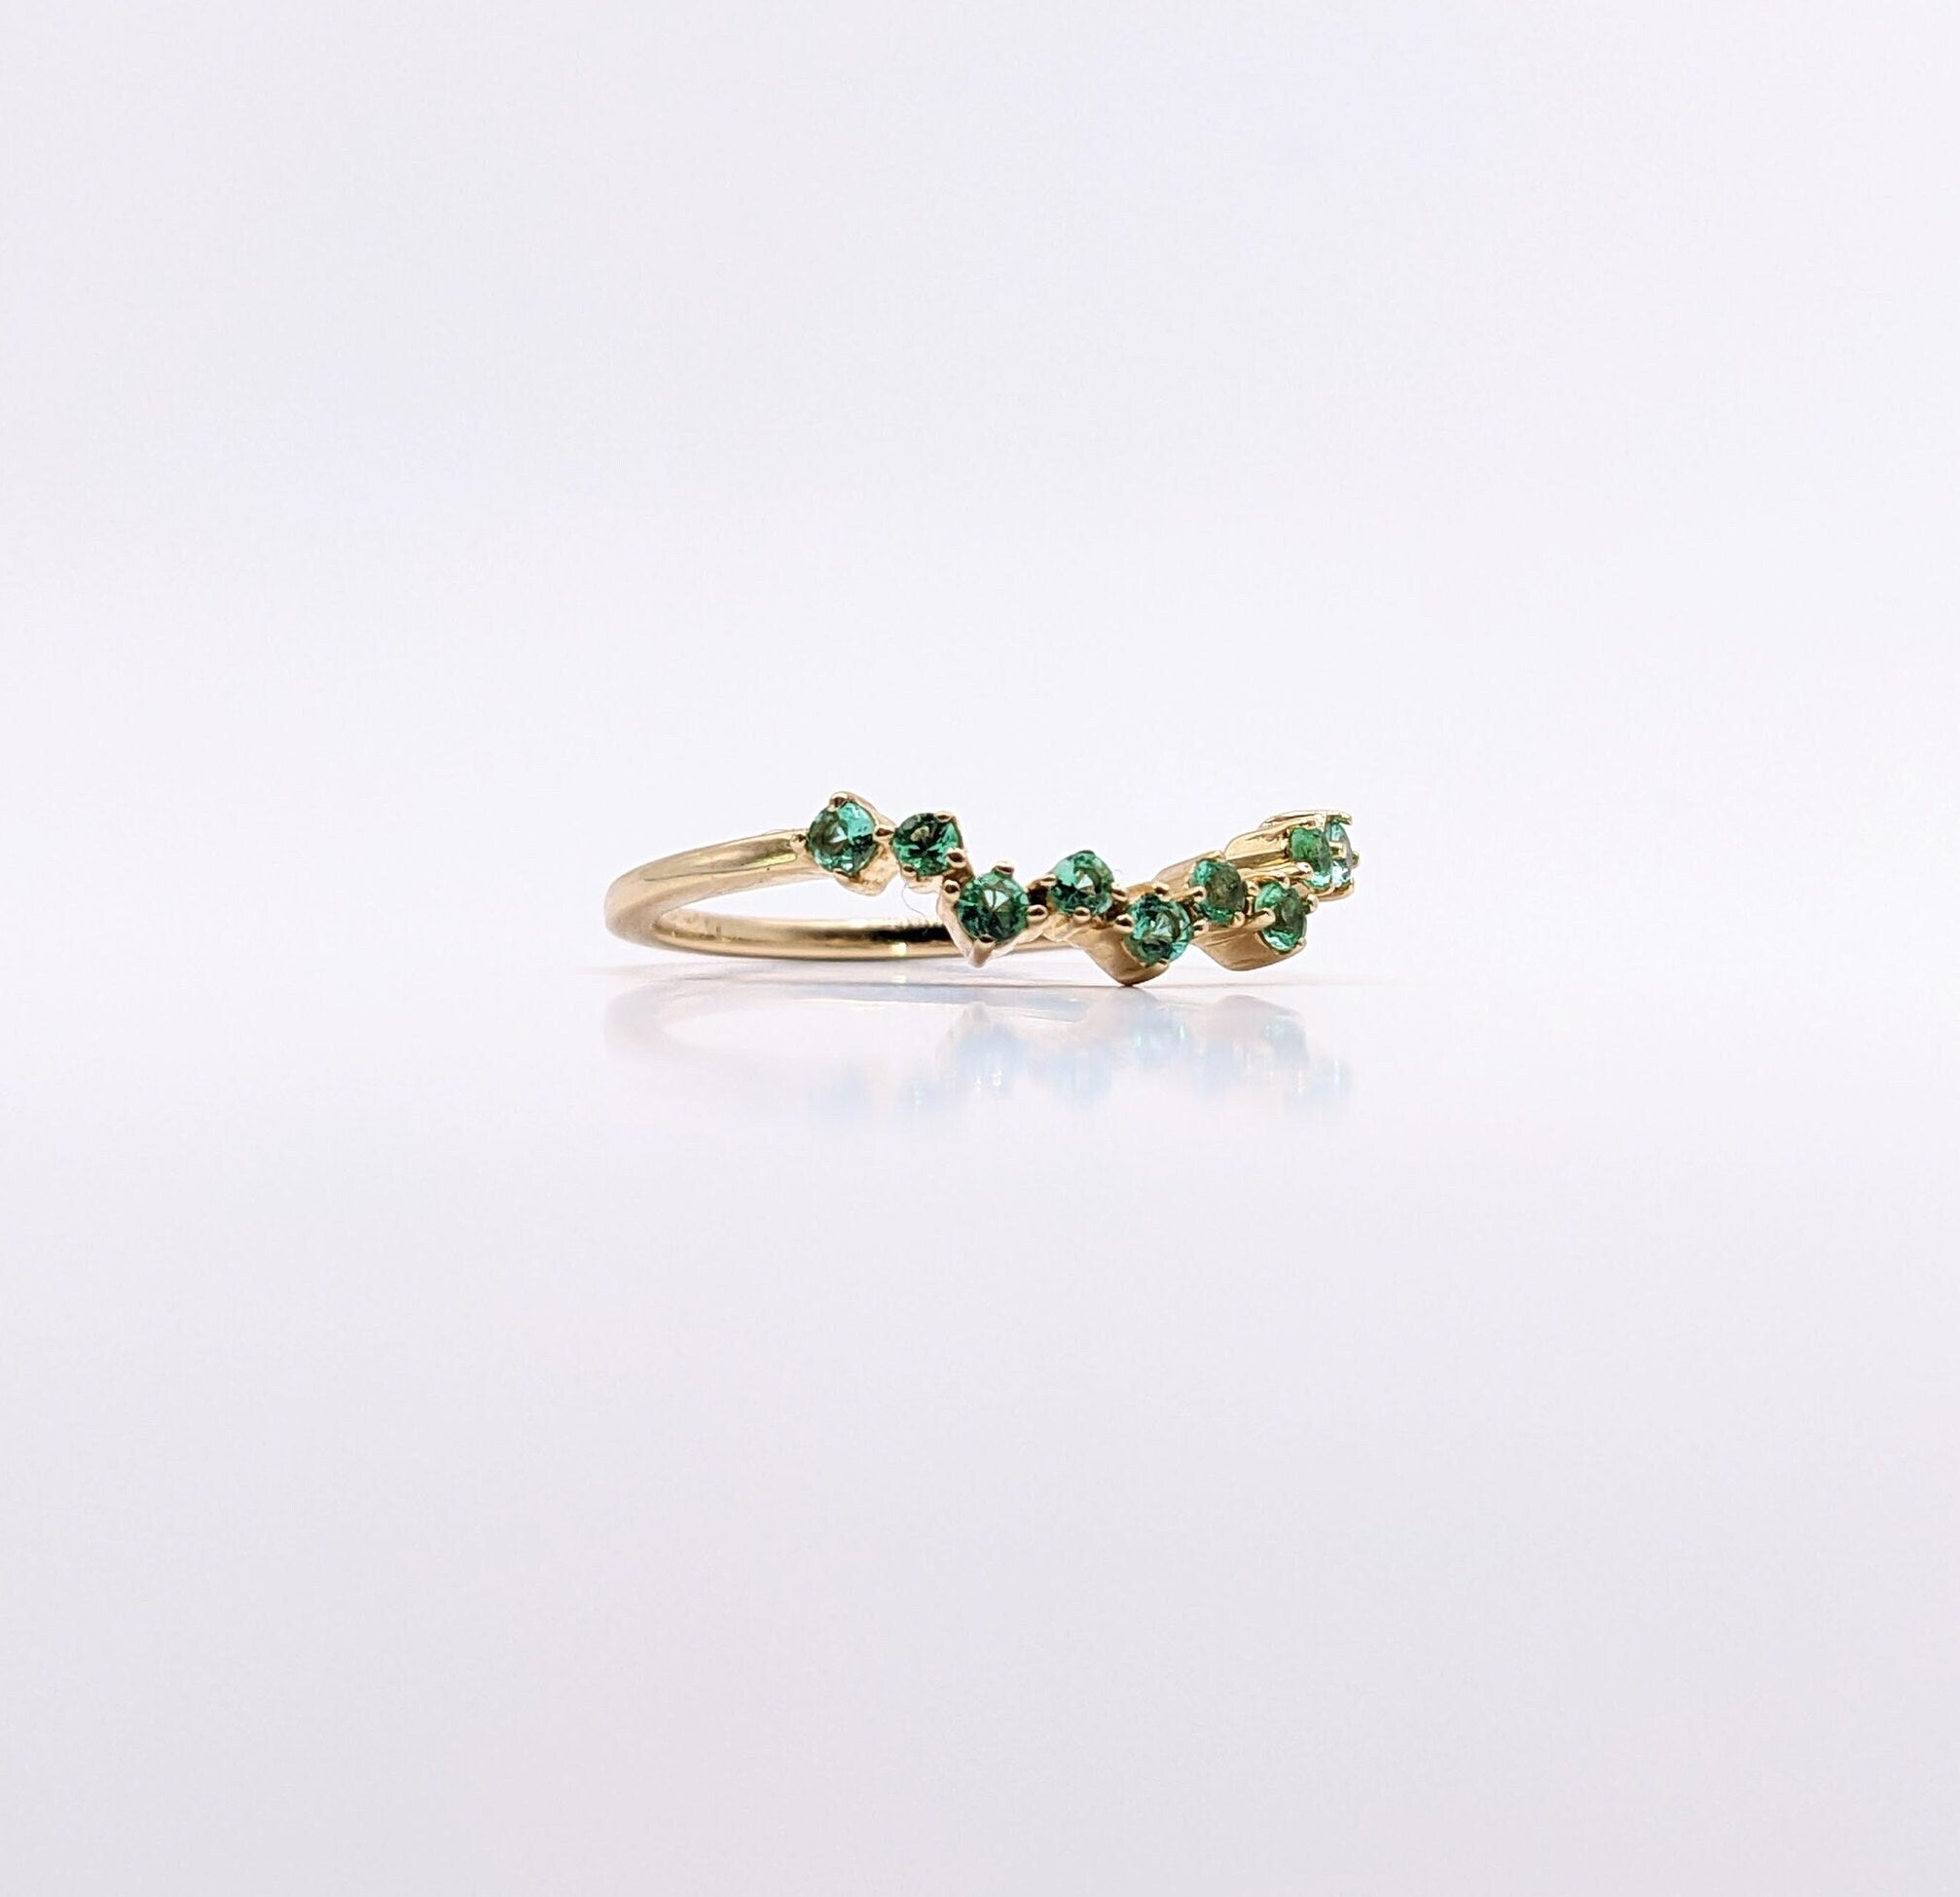 Unique 14k Solid Gold Band w Emerald Accents | Green Gemstone Ring | Stackable Ring | Anniversary Gift | May Birthstone | Tiara Crown Ring